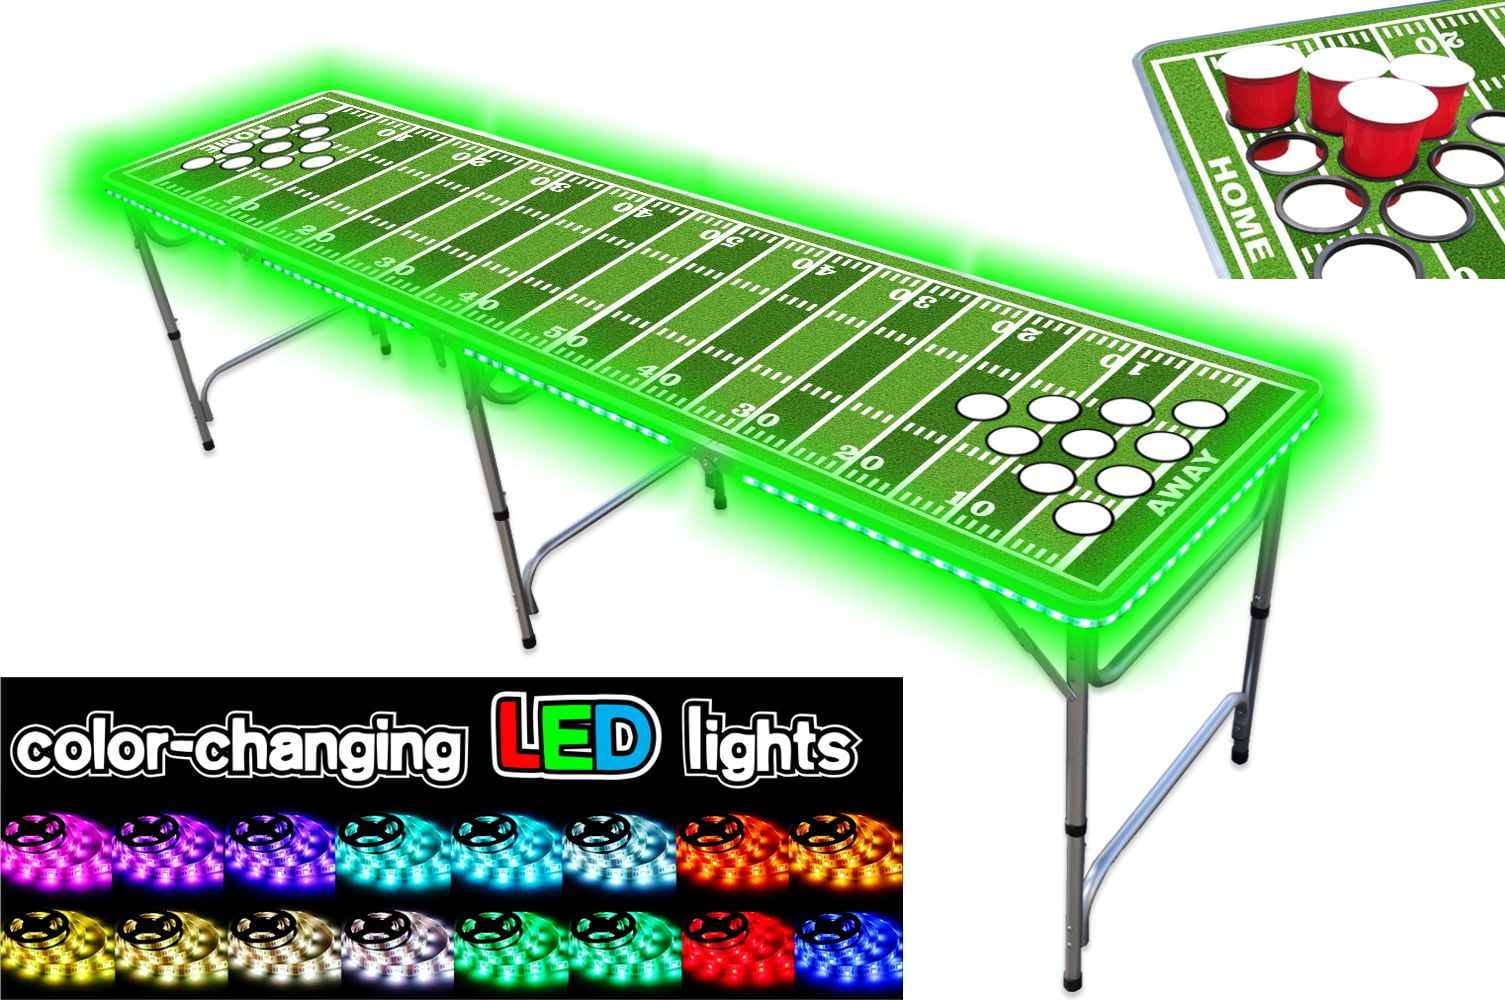 PartyPongTables.com 8-Foot Professional Beer Pong Table w/Optional Cup Holes & LED Lights Choose Your Table Model Top Pong Edition